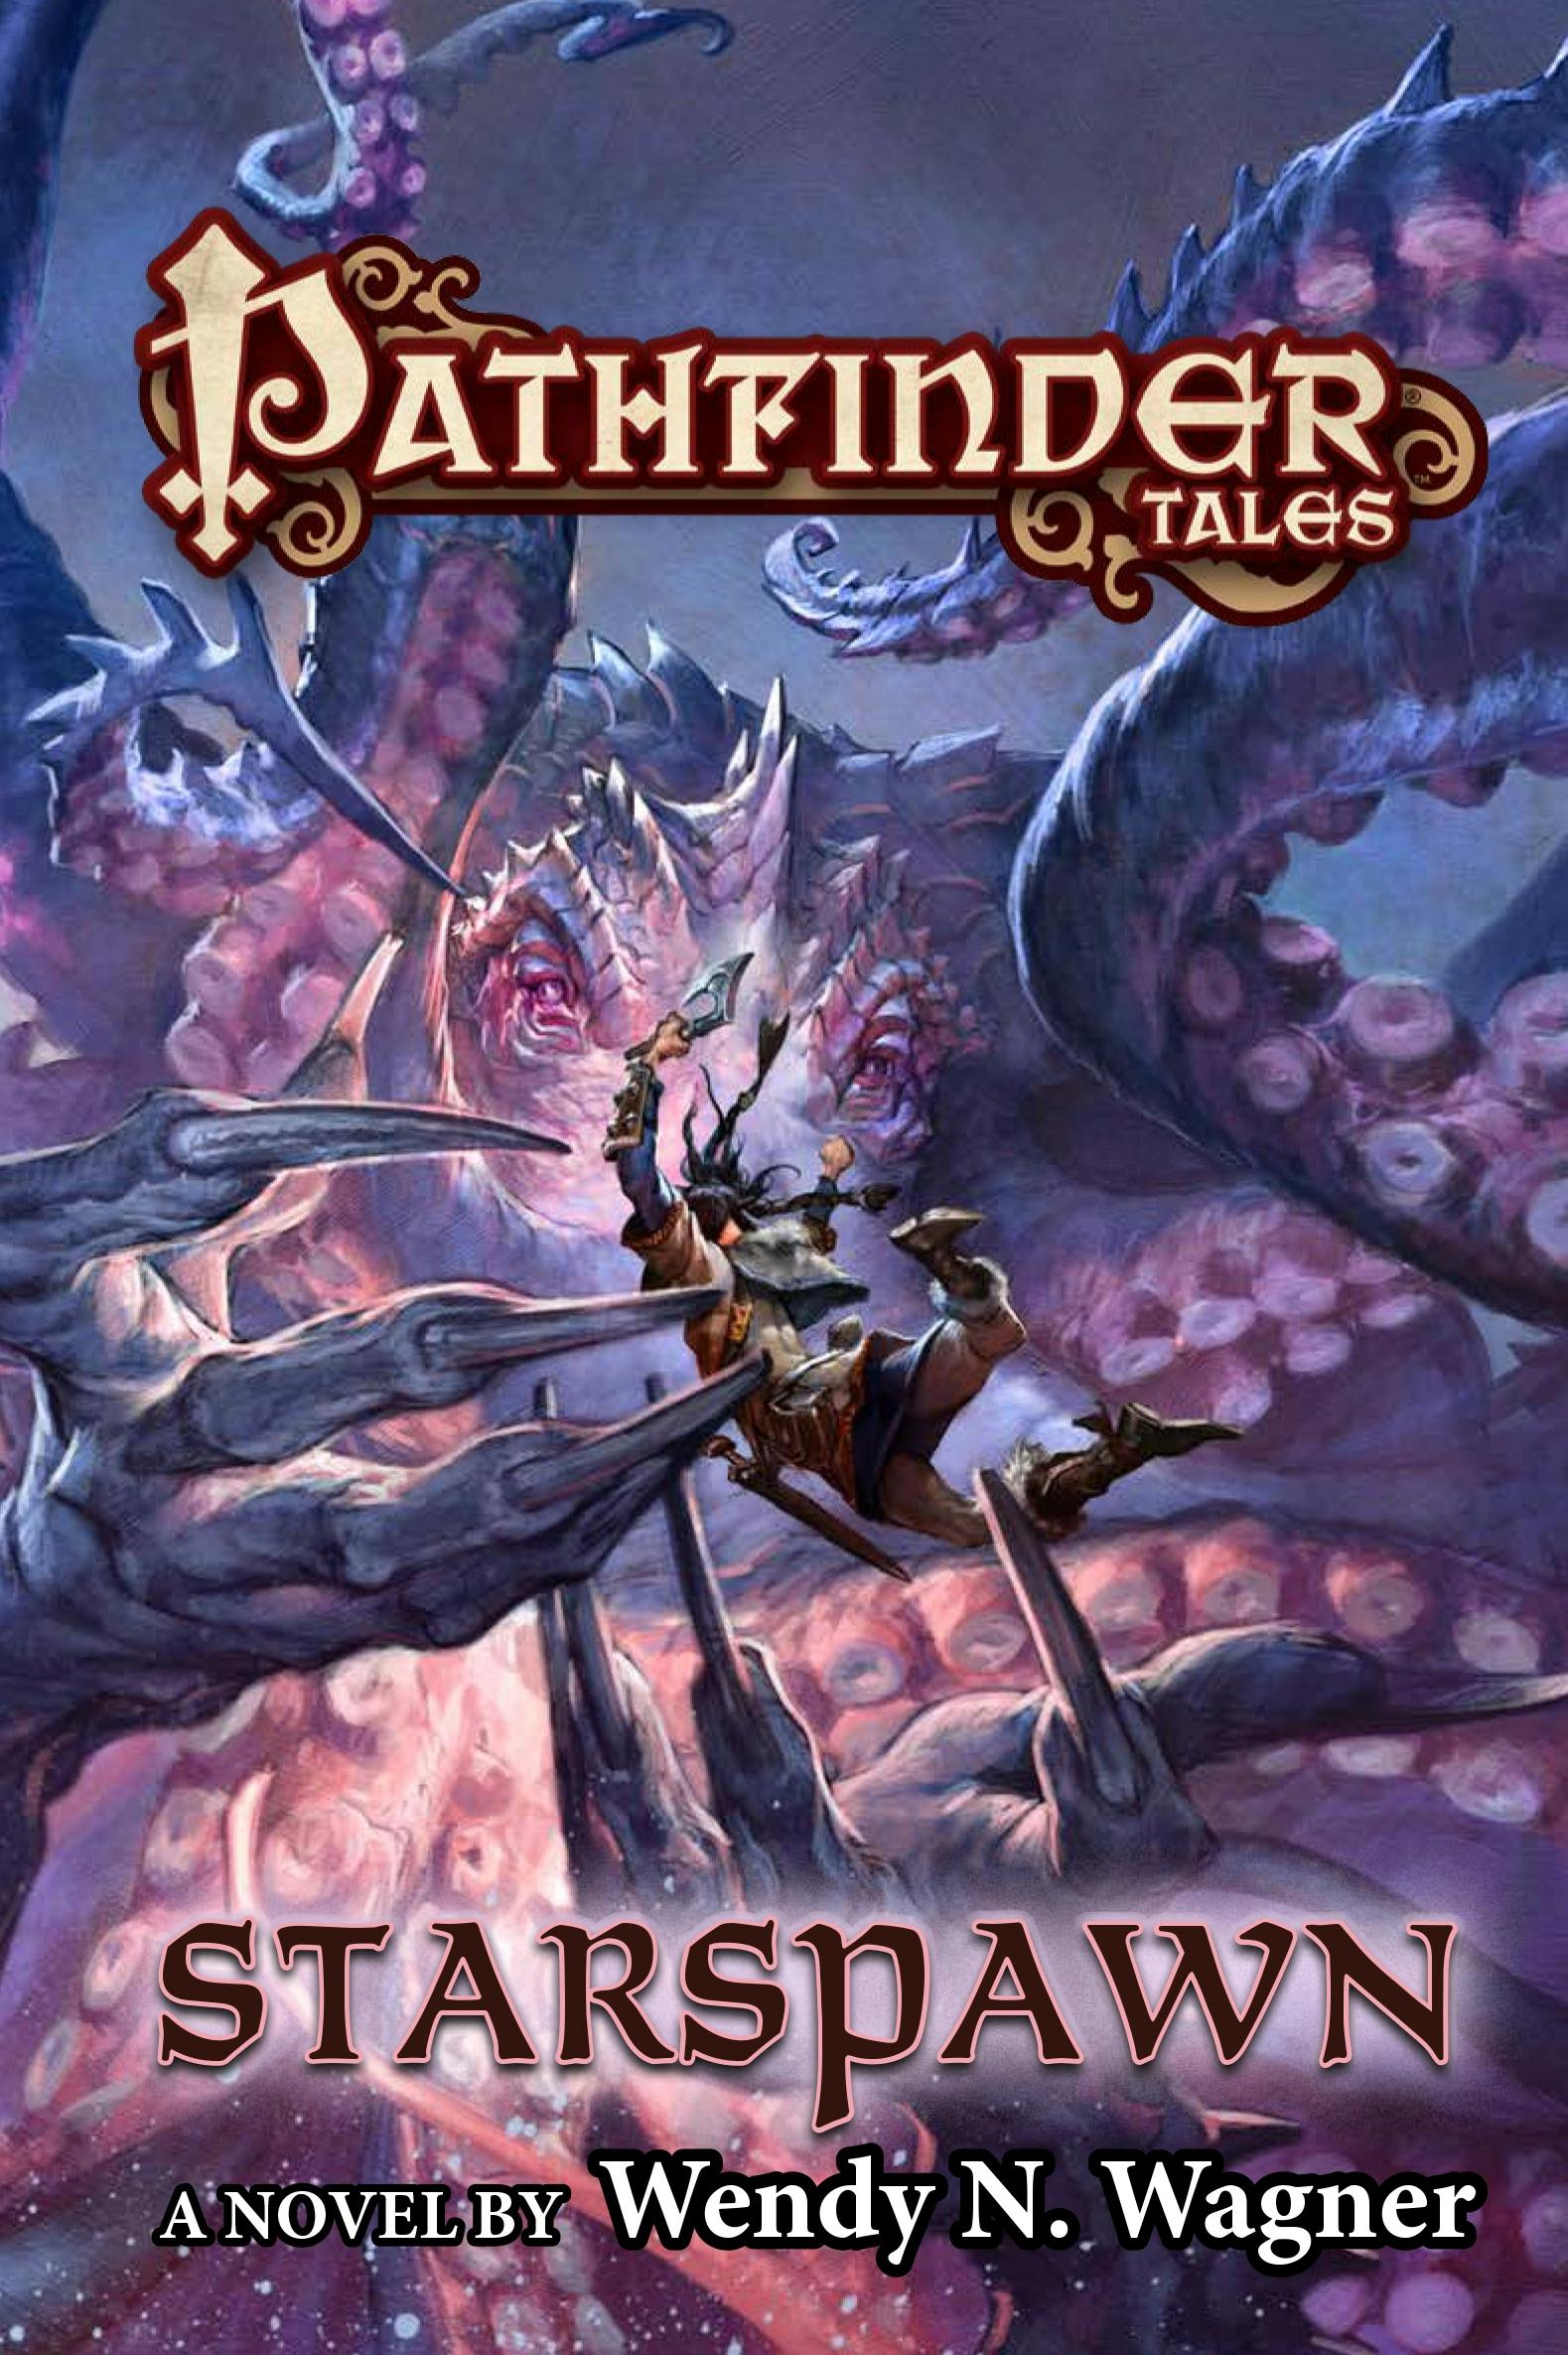 Cover for the book titled as: Pathfinder Tales: Starspawn